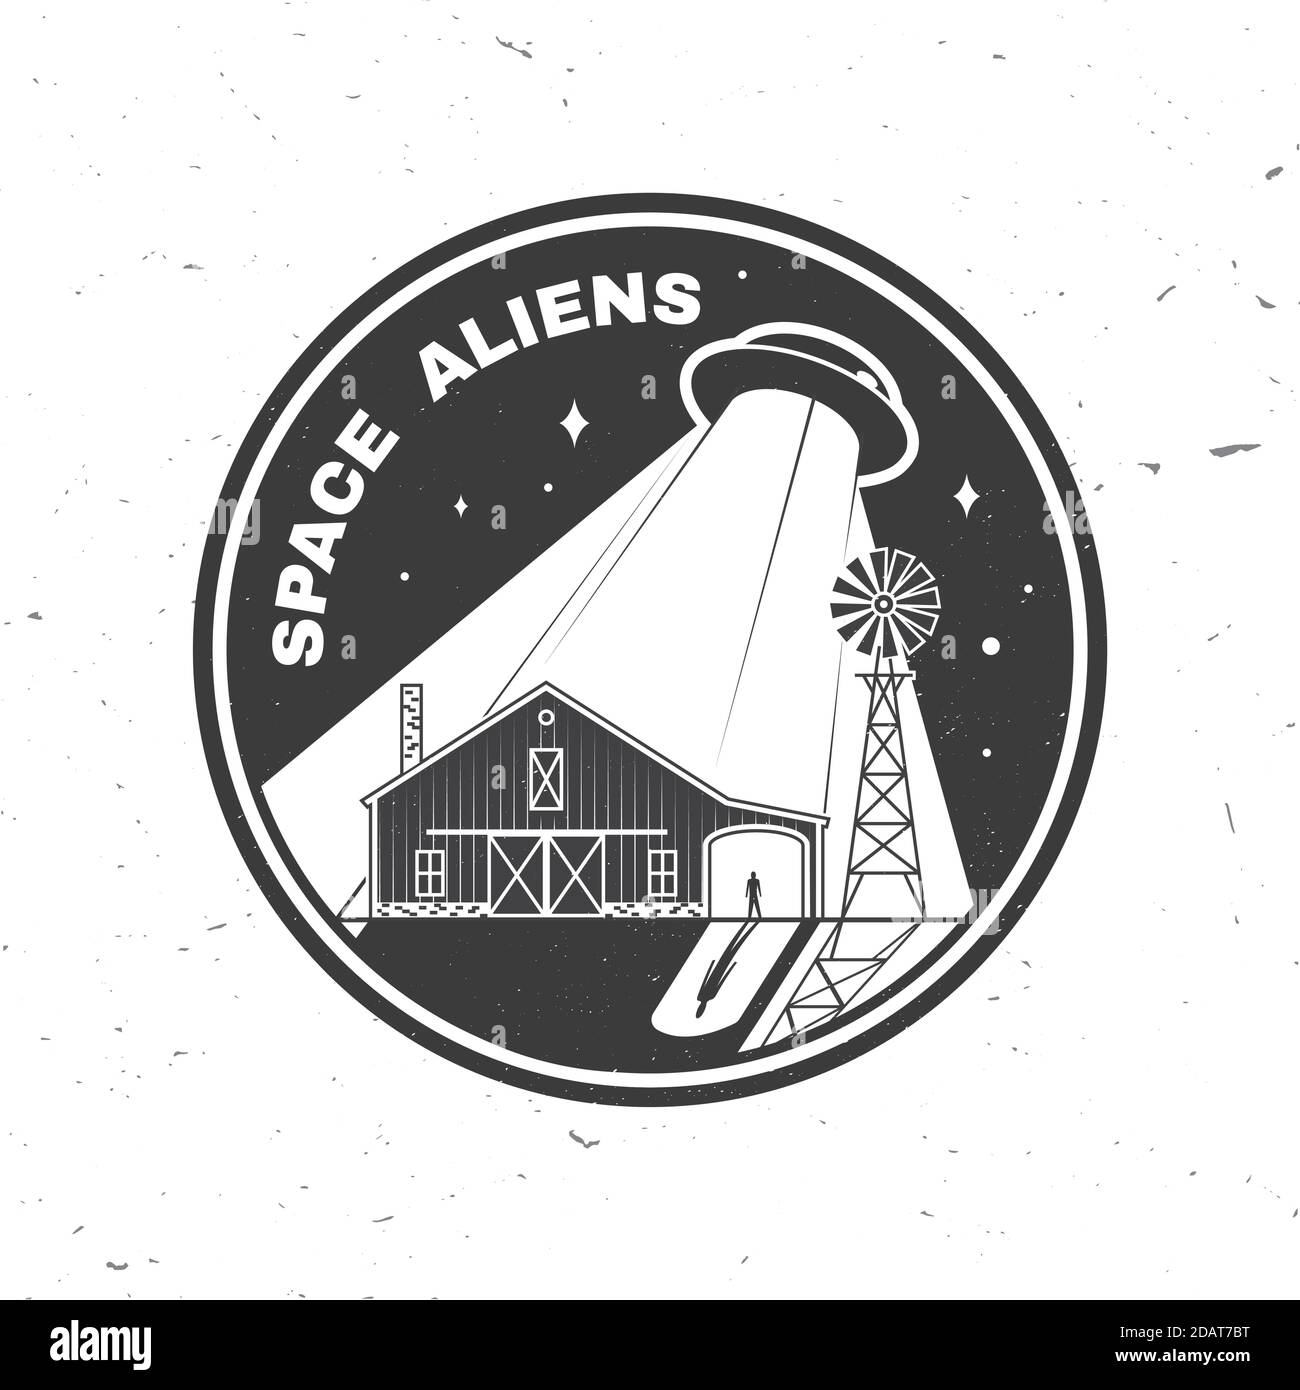 Space Aliens. Humans are not alone. Vector illustration. Concept for shirt, print, stamp, overlay or template. Vintage typography design with ufo flying spaceship and farm silhouette. Stock Vector